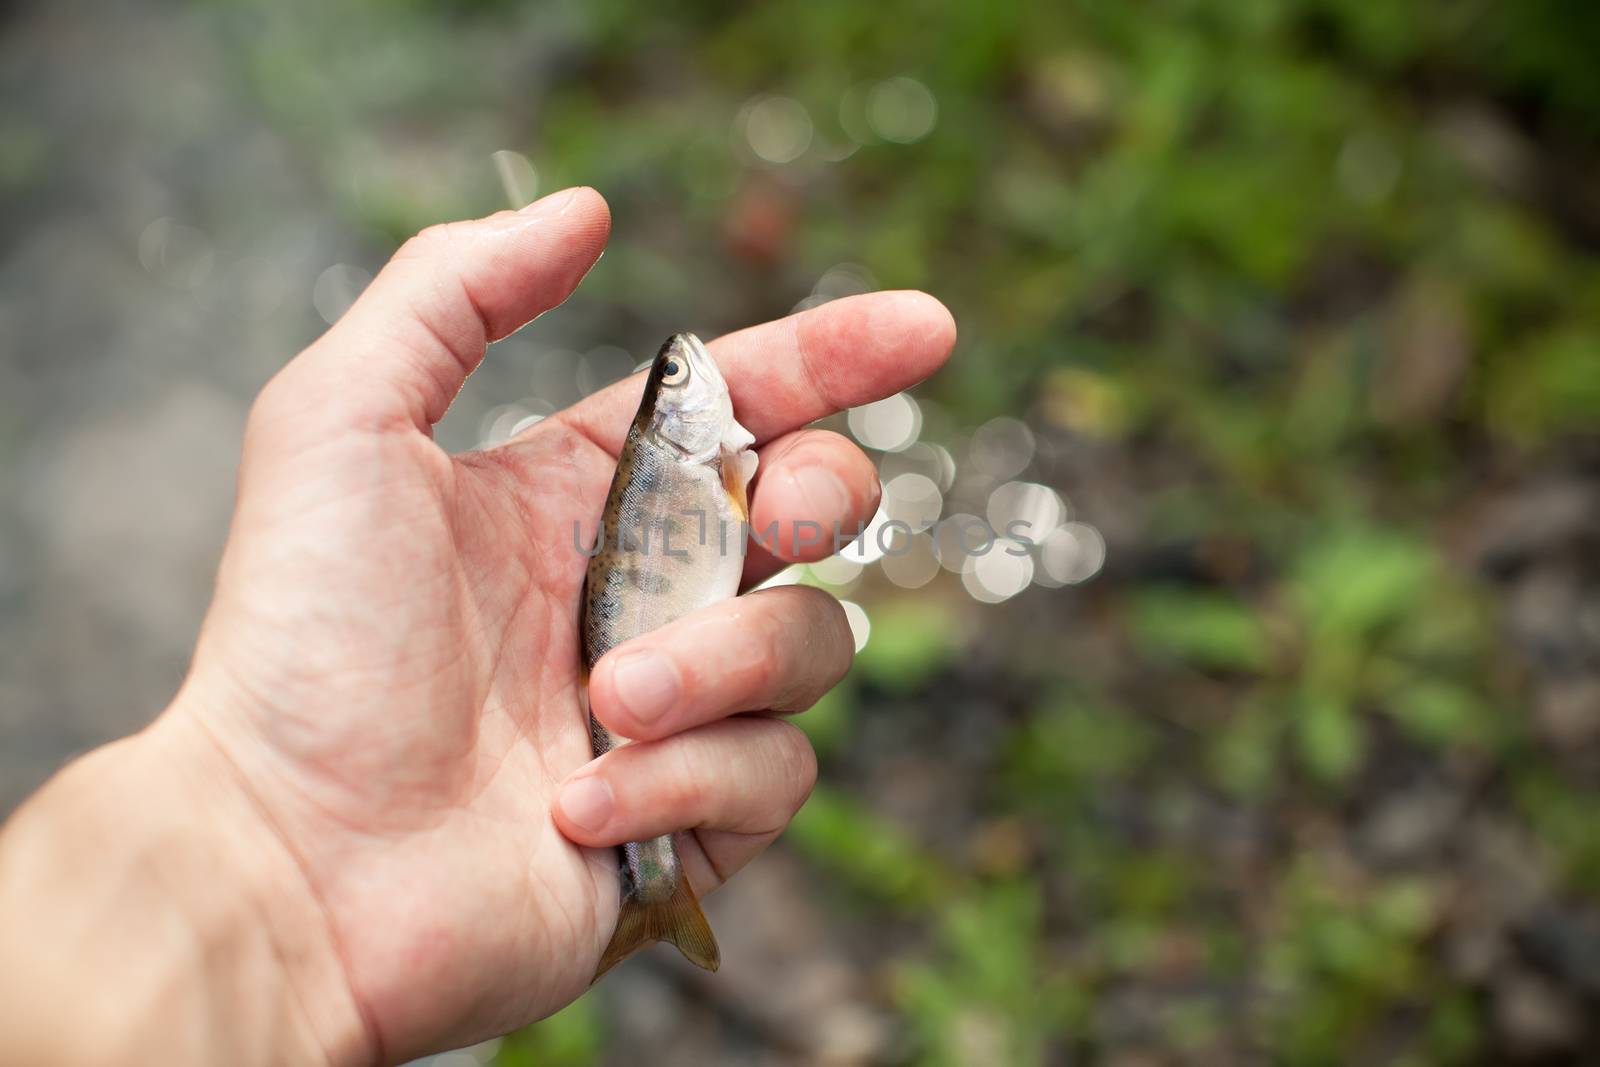 Freshwater Fish in a hand by deamles